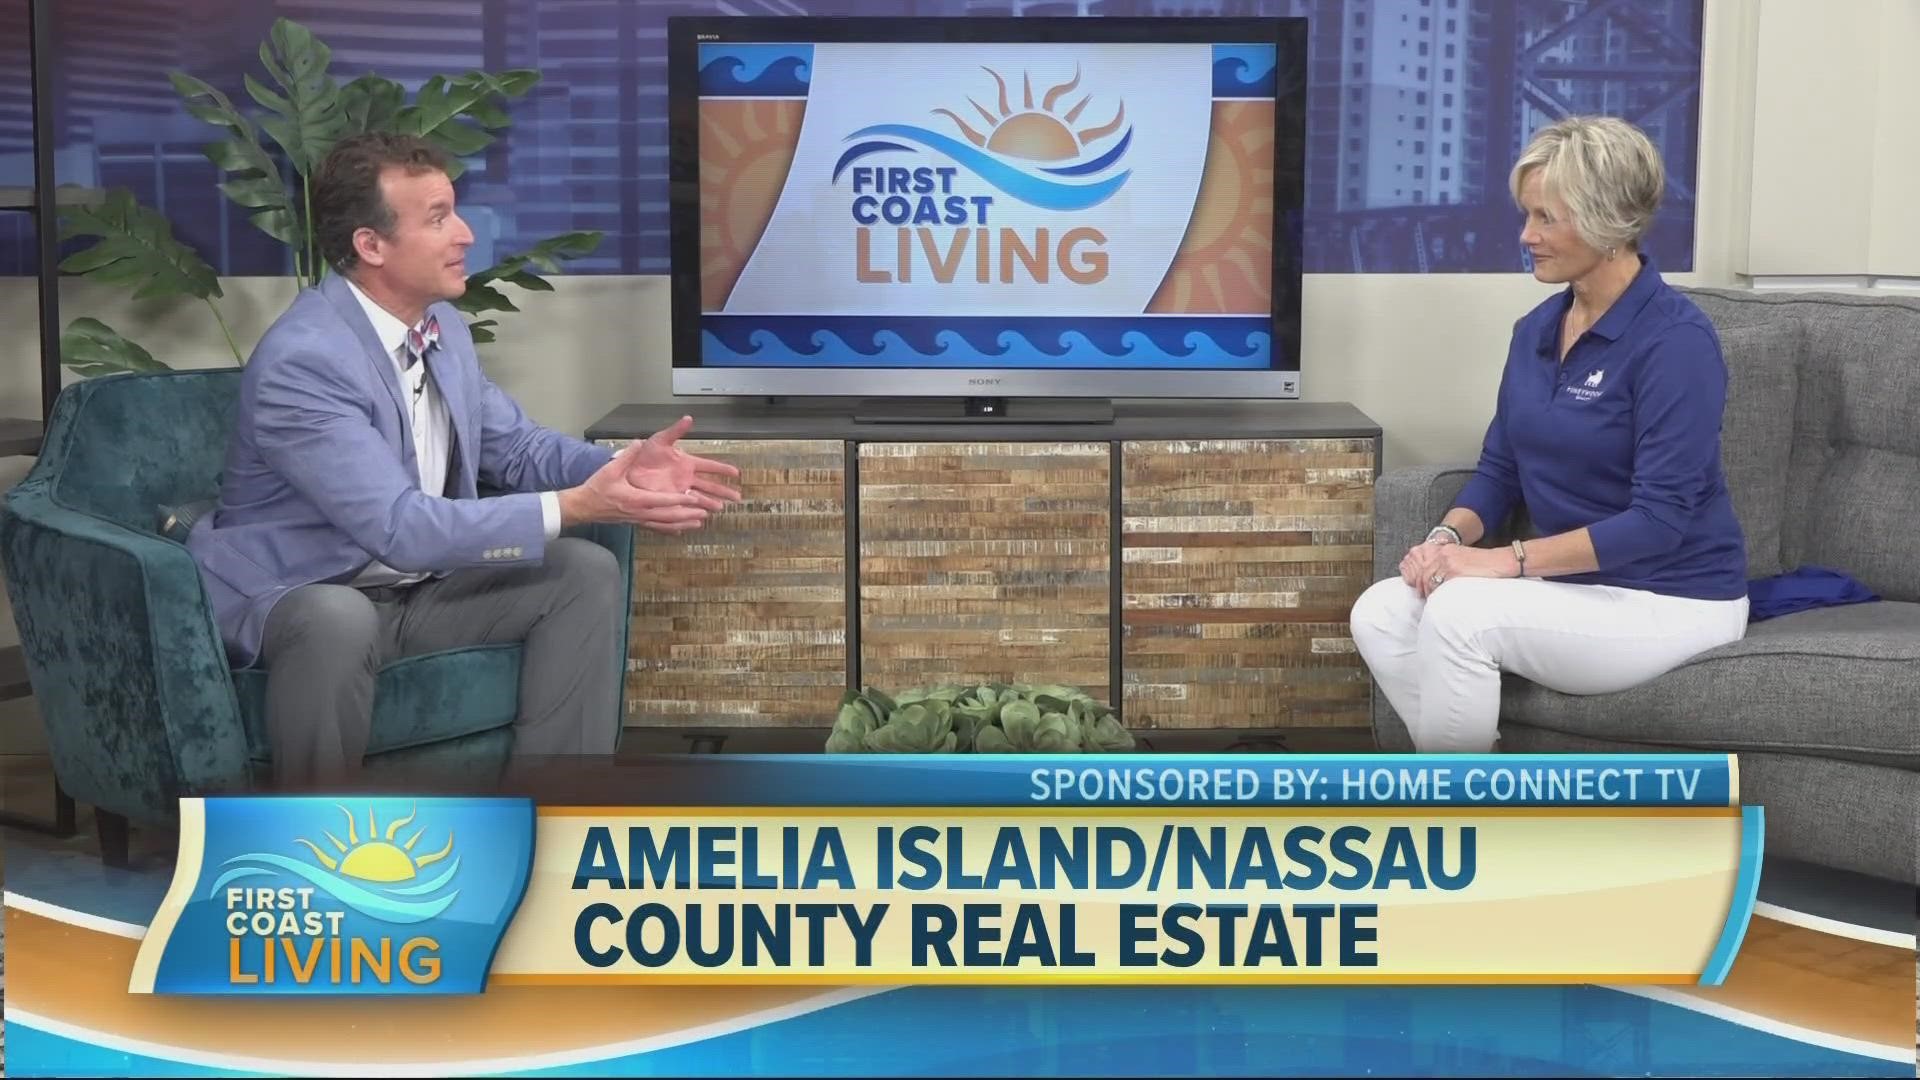 Michele Holbrook of Pineywoods Realty shares the real estate opportunities in Amelia Island and Nassau County and what makes it different.